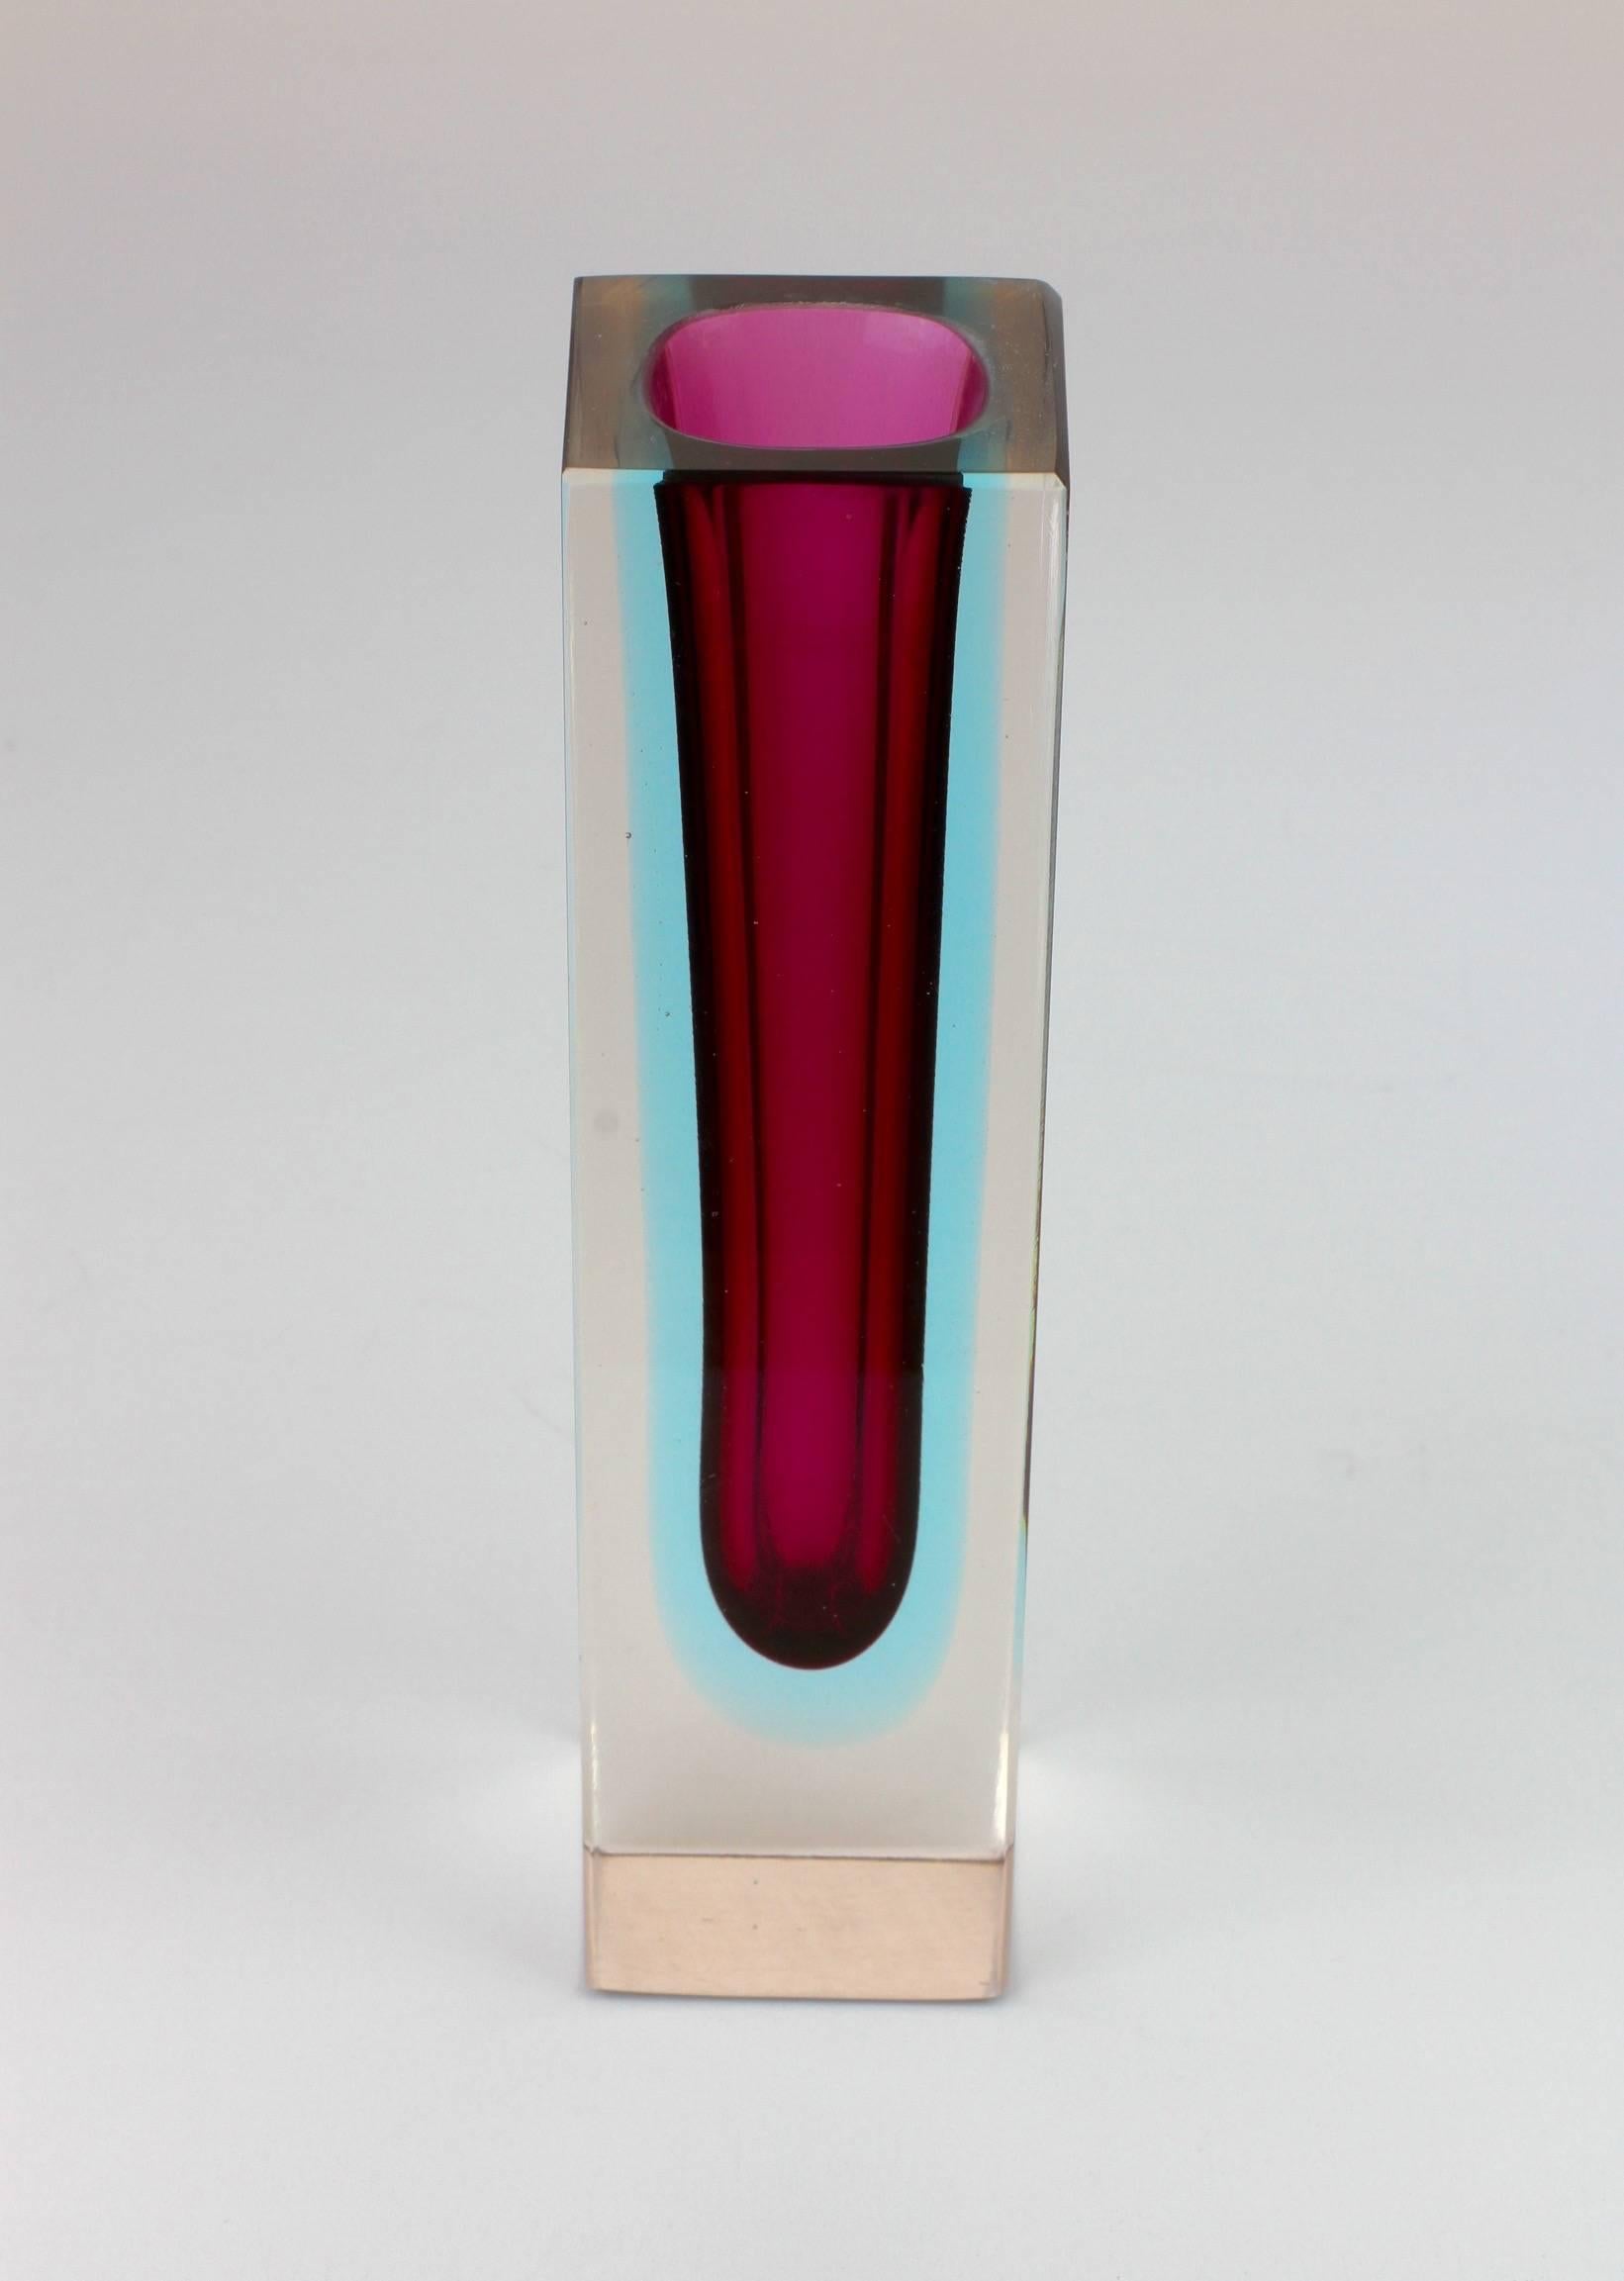 Gorgeous Mid-Century Italian Murano faceted colored / coloured glass vase attributed to Mandruzatto, circa 1960. An absolutely lovely color combination of deep purple to light blue to light pink 'Sommerso' or 'Submerged' glass technique.